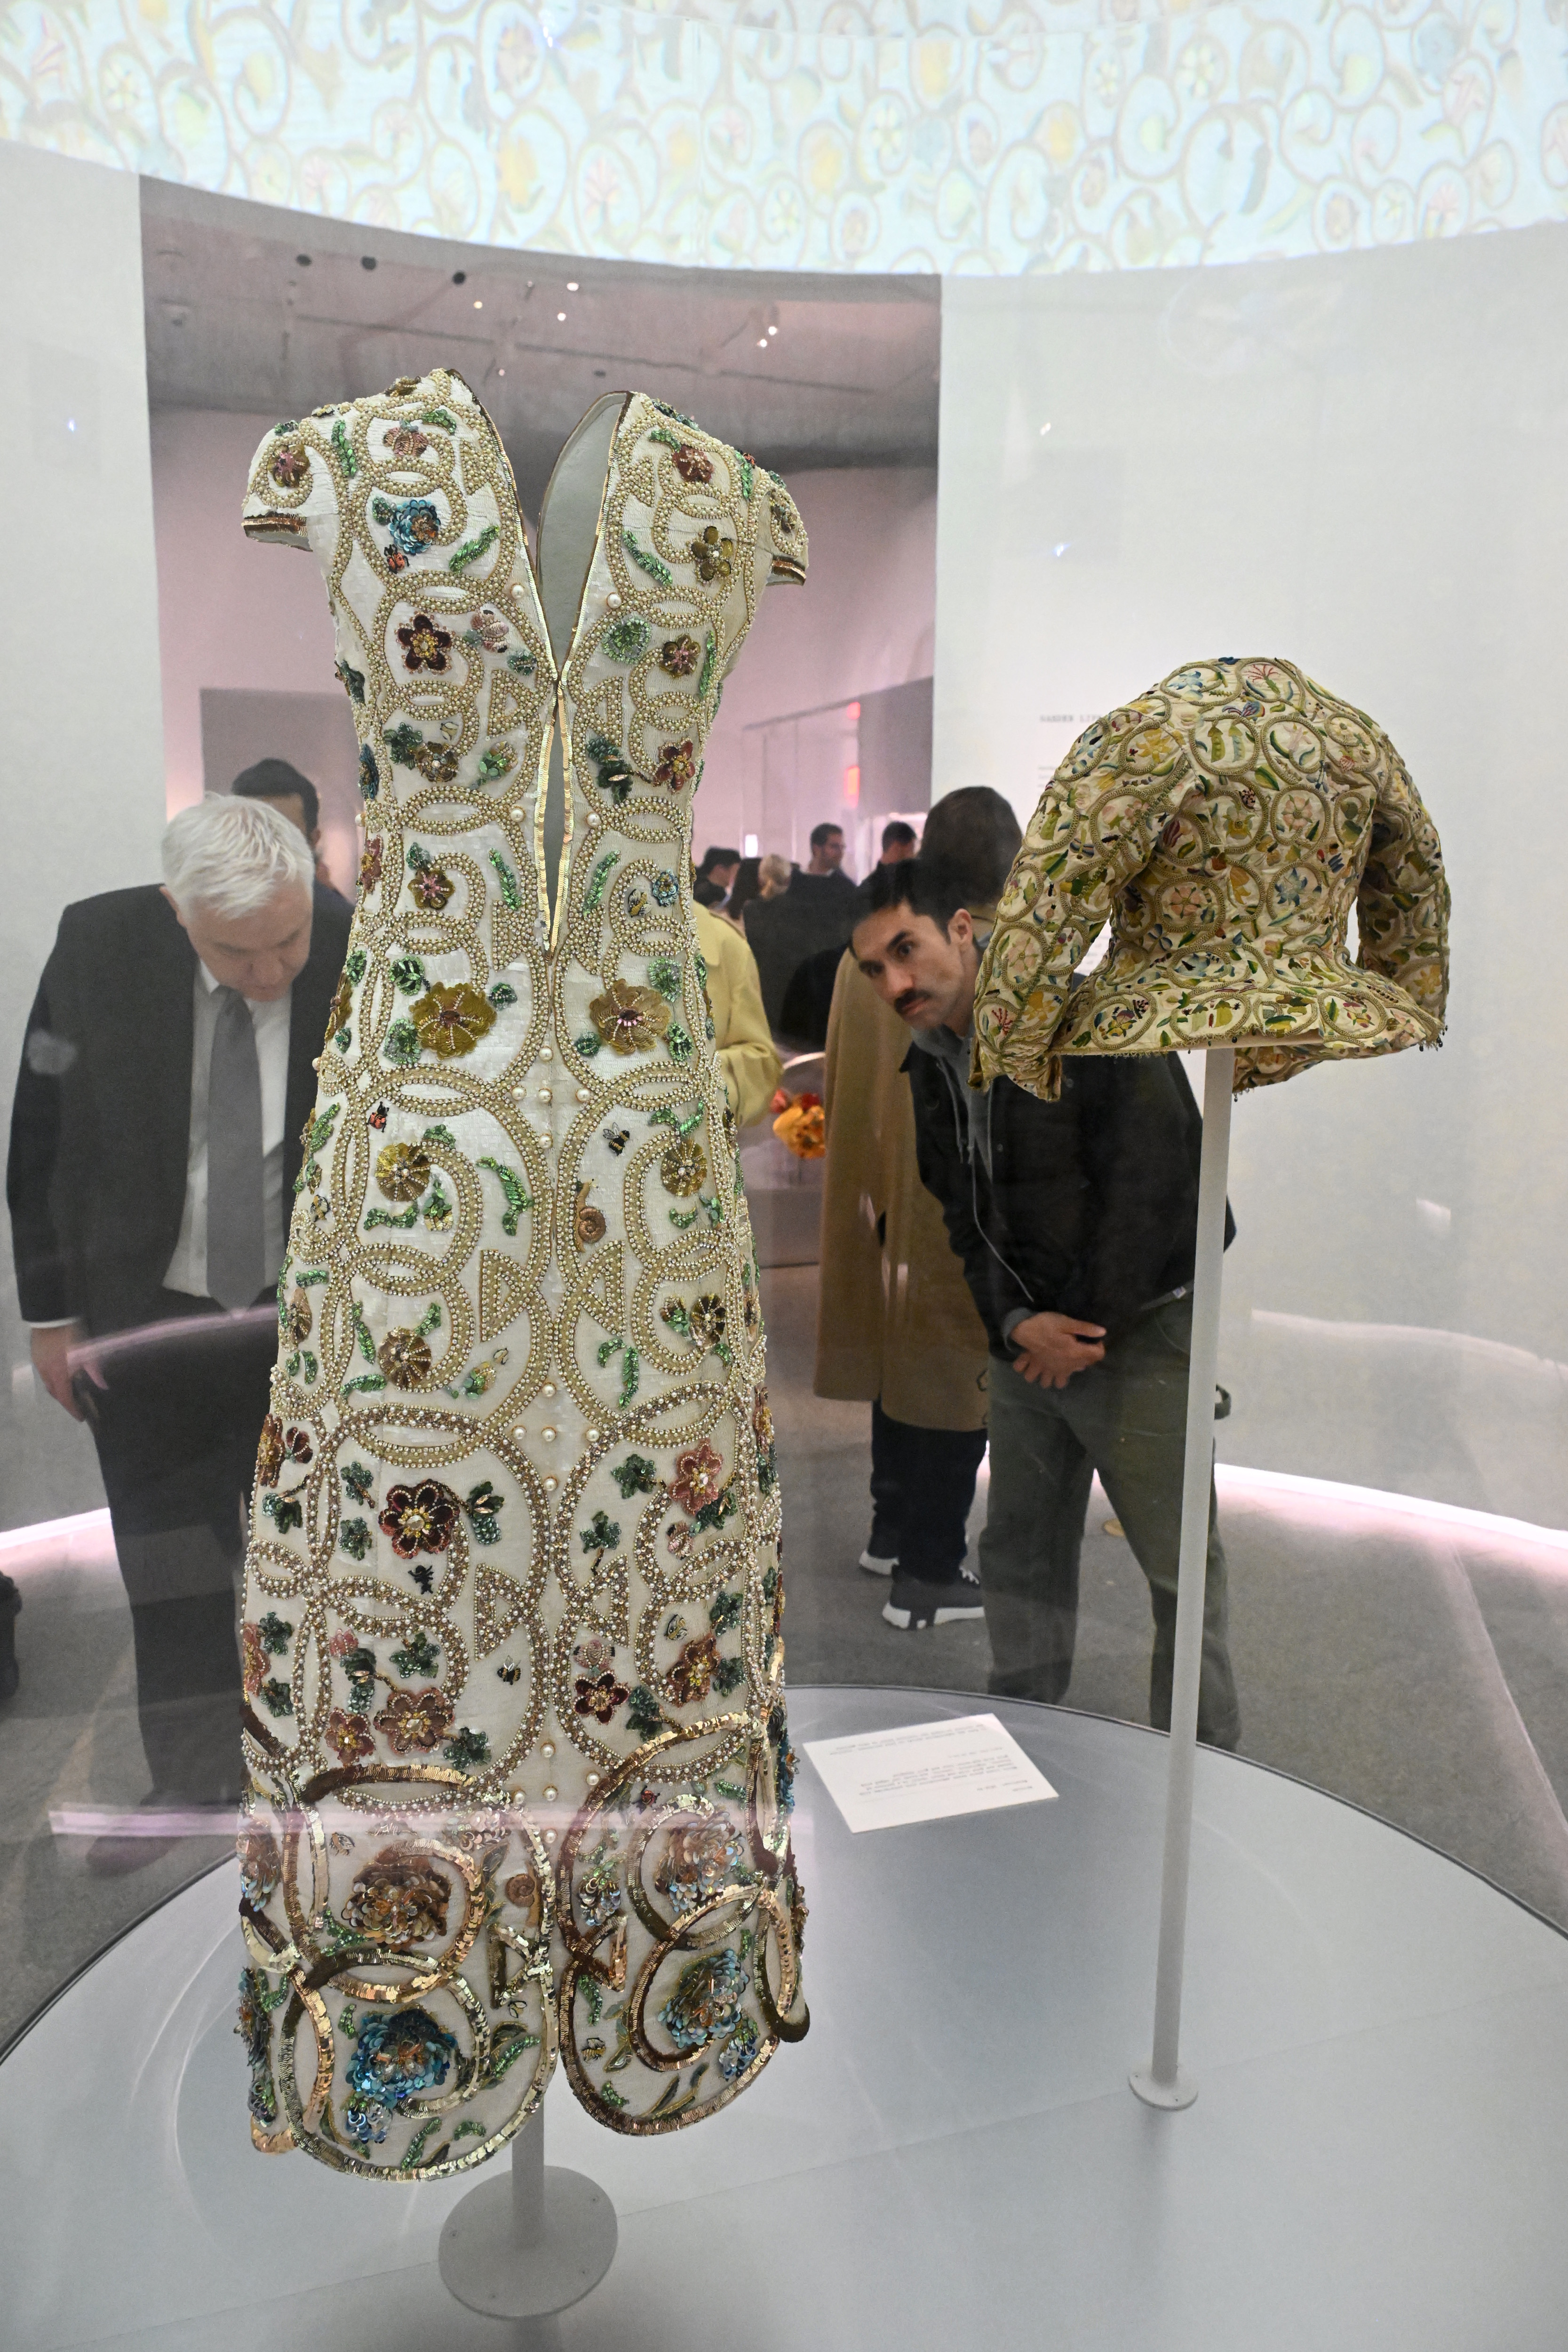 Vintage dress and jacket on display, intricate beadwork, visitors observing exhibit in background